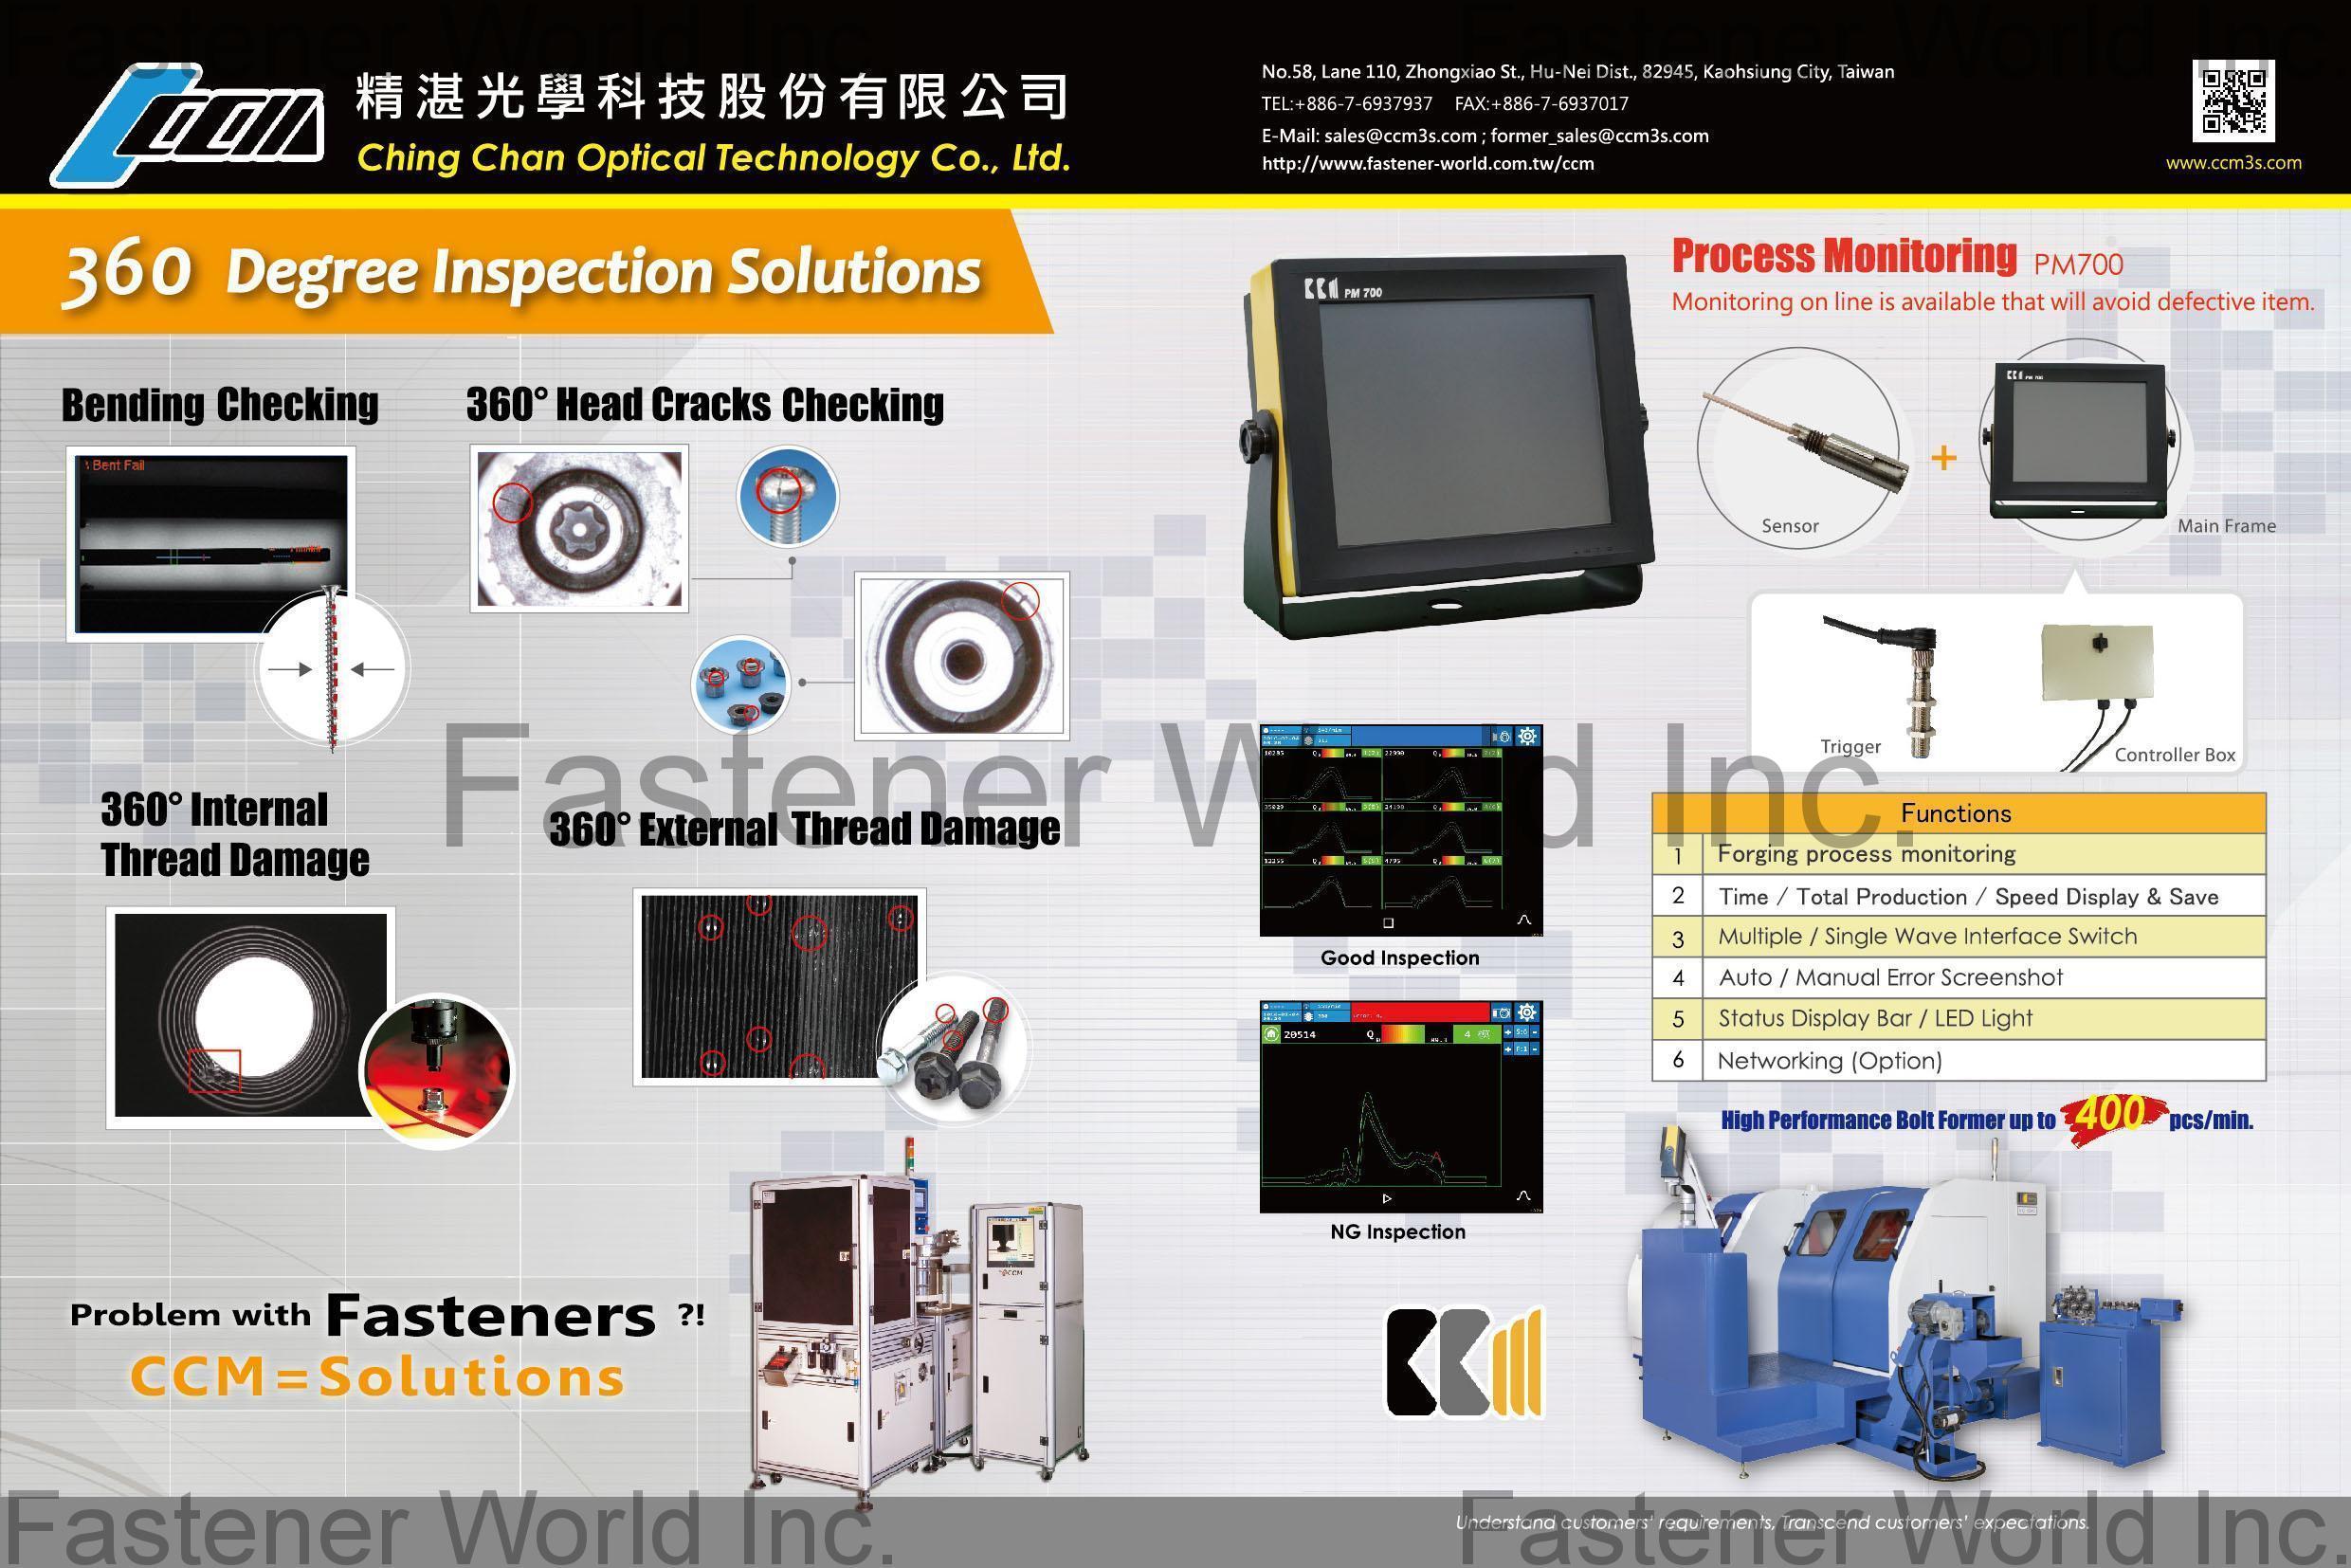 CHING CHAN OPTICAL TECHNOLOGY CO., LTD. (CCM) , 360 Degree Inspection Solutions, Process Monitoring , Process Monitoring System